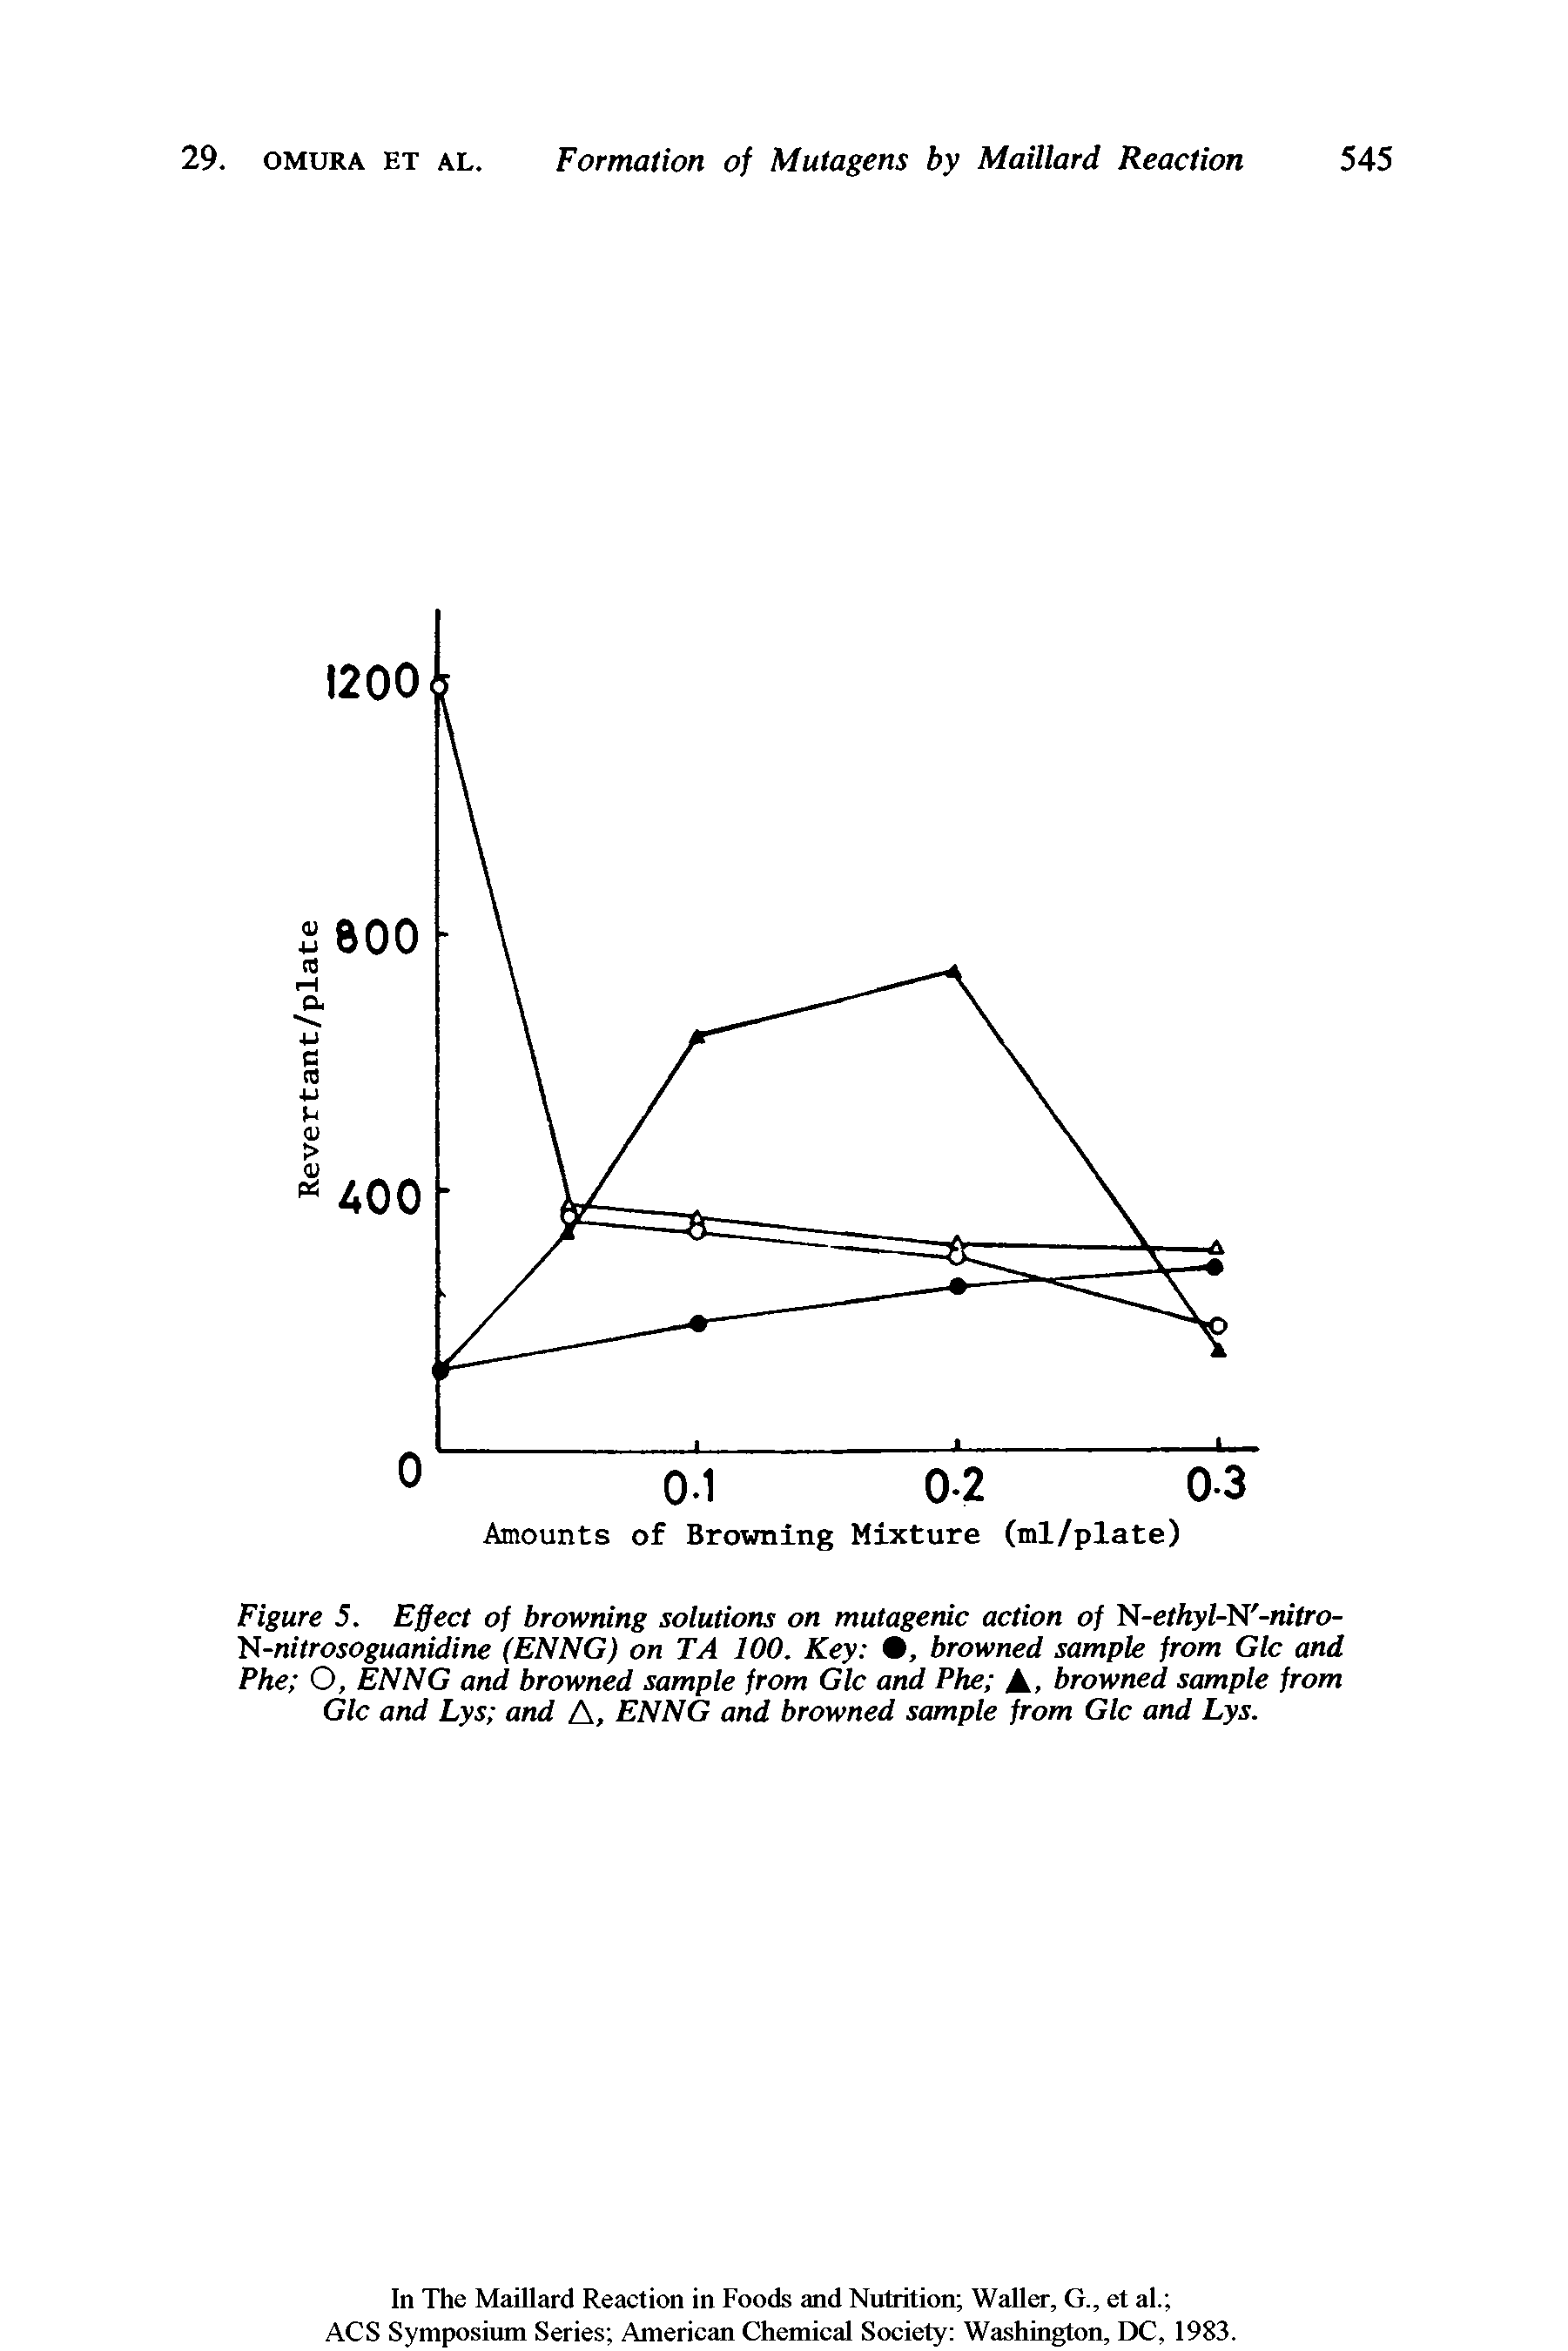 Figure 5. Effect of browning solutions on mutagenic action of N-ethyl-N -nitro-N-nitrosoguanidine (ENNG) on TA 100. Key , browned sample from Glc and Phe O, ENNG and browned sample from Glc and Phe A, browned sample from Glc and Lys and A, ENNG and browned sample from Glc and Lys.